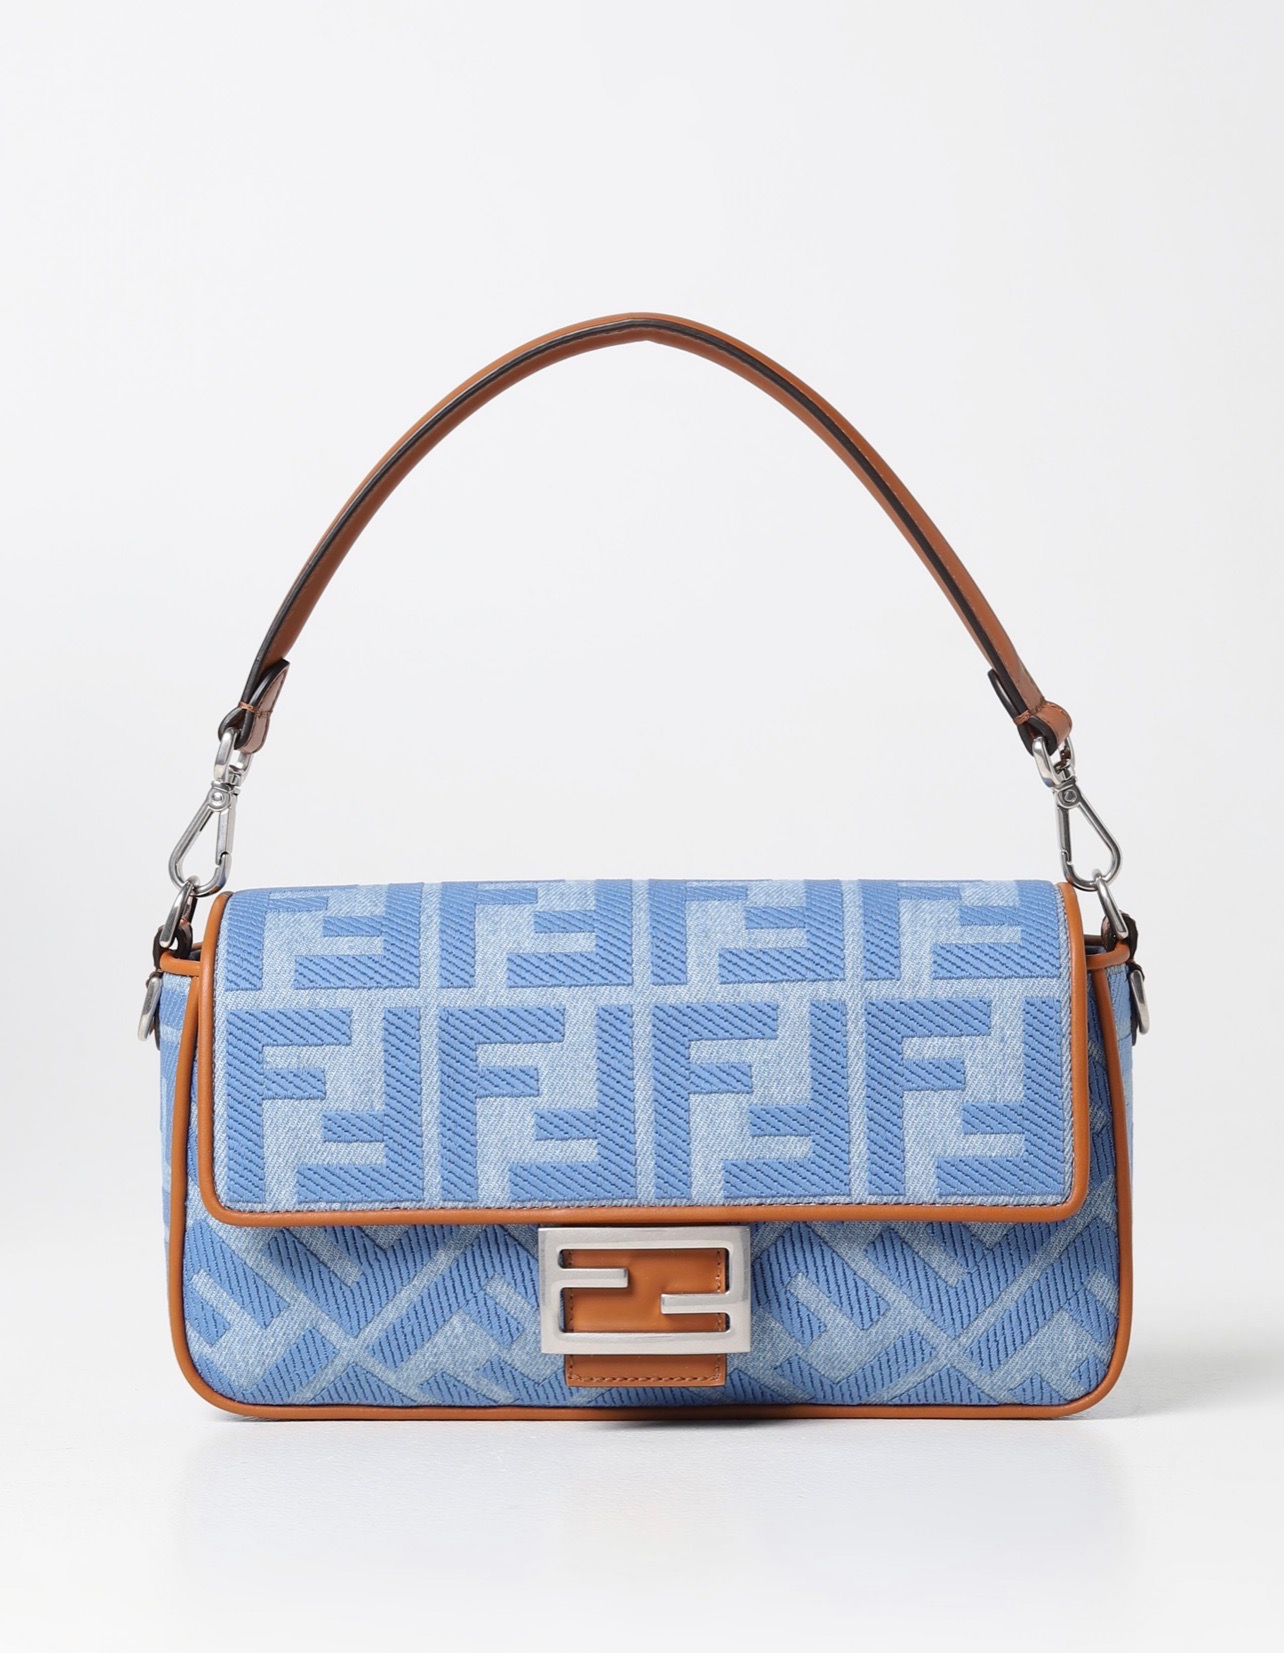 Bomb Accessories of The Day: Fendi's New Denim Baguette Bag is Worth The  Splurge – Fashion Bomb Daily